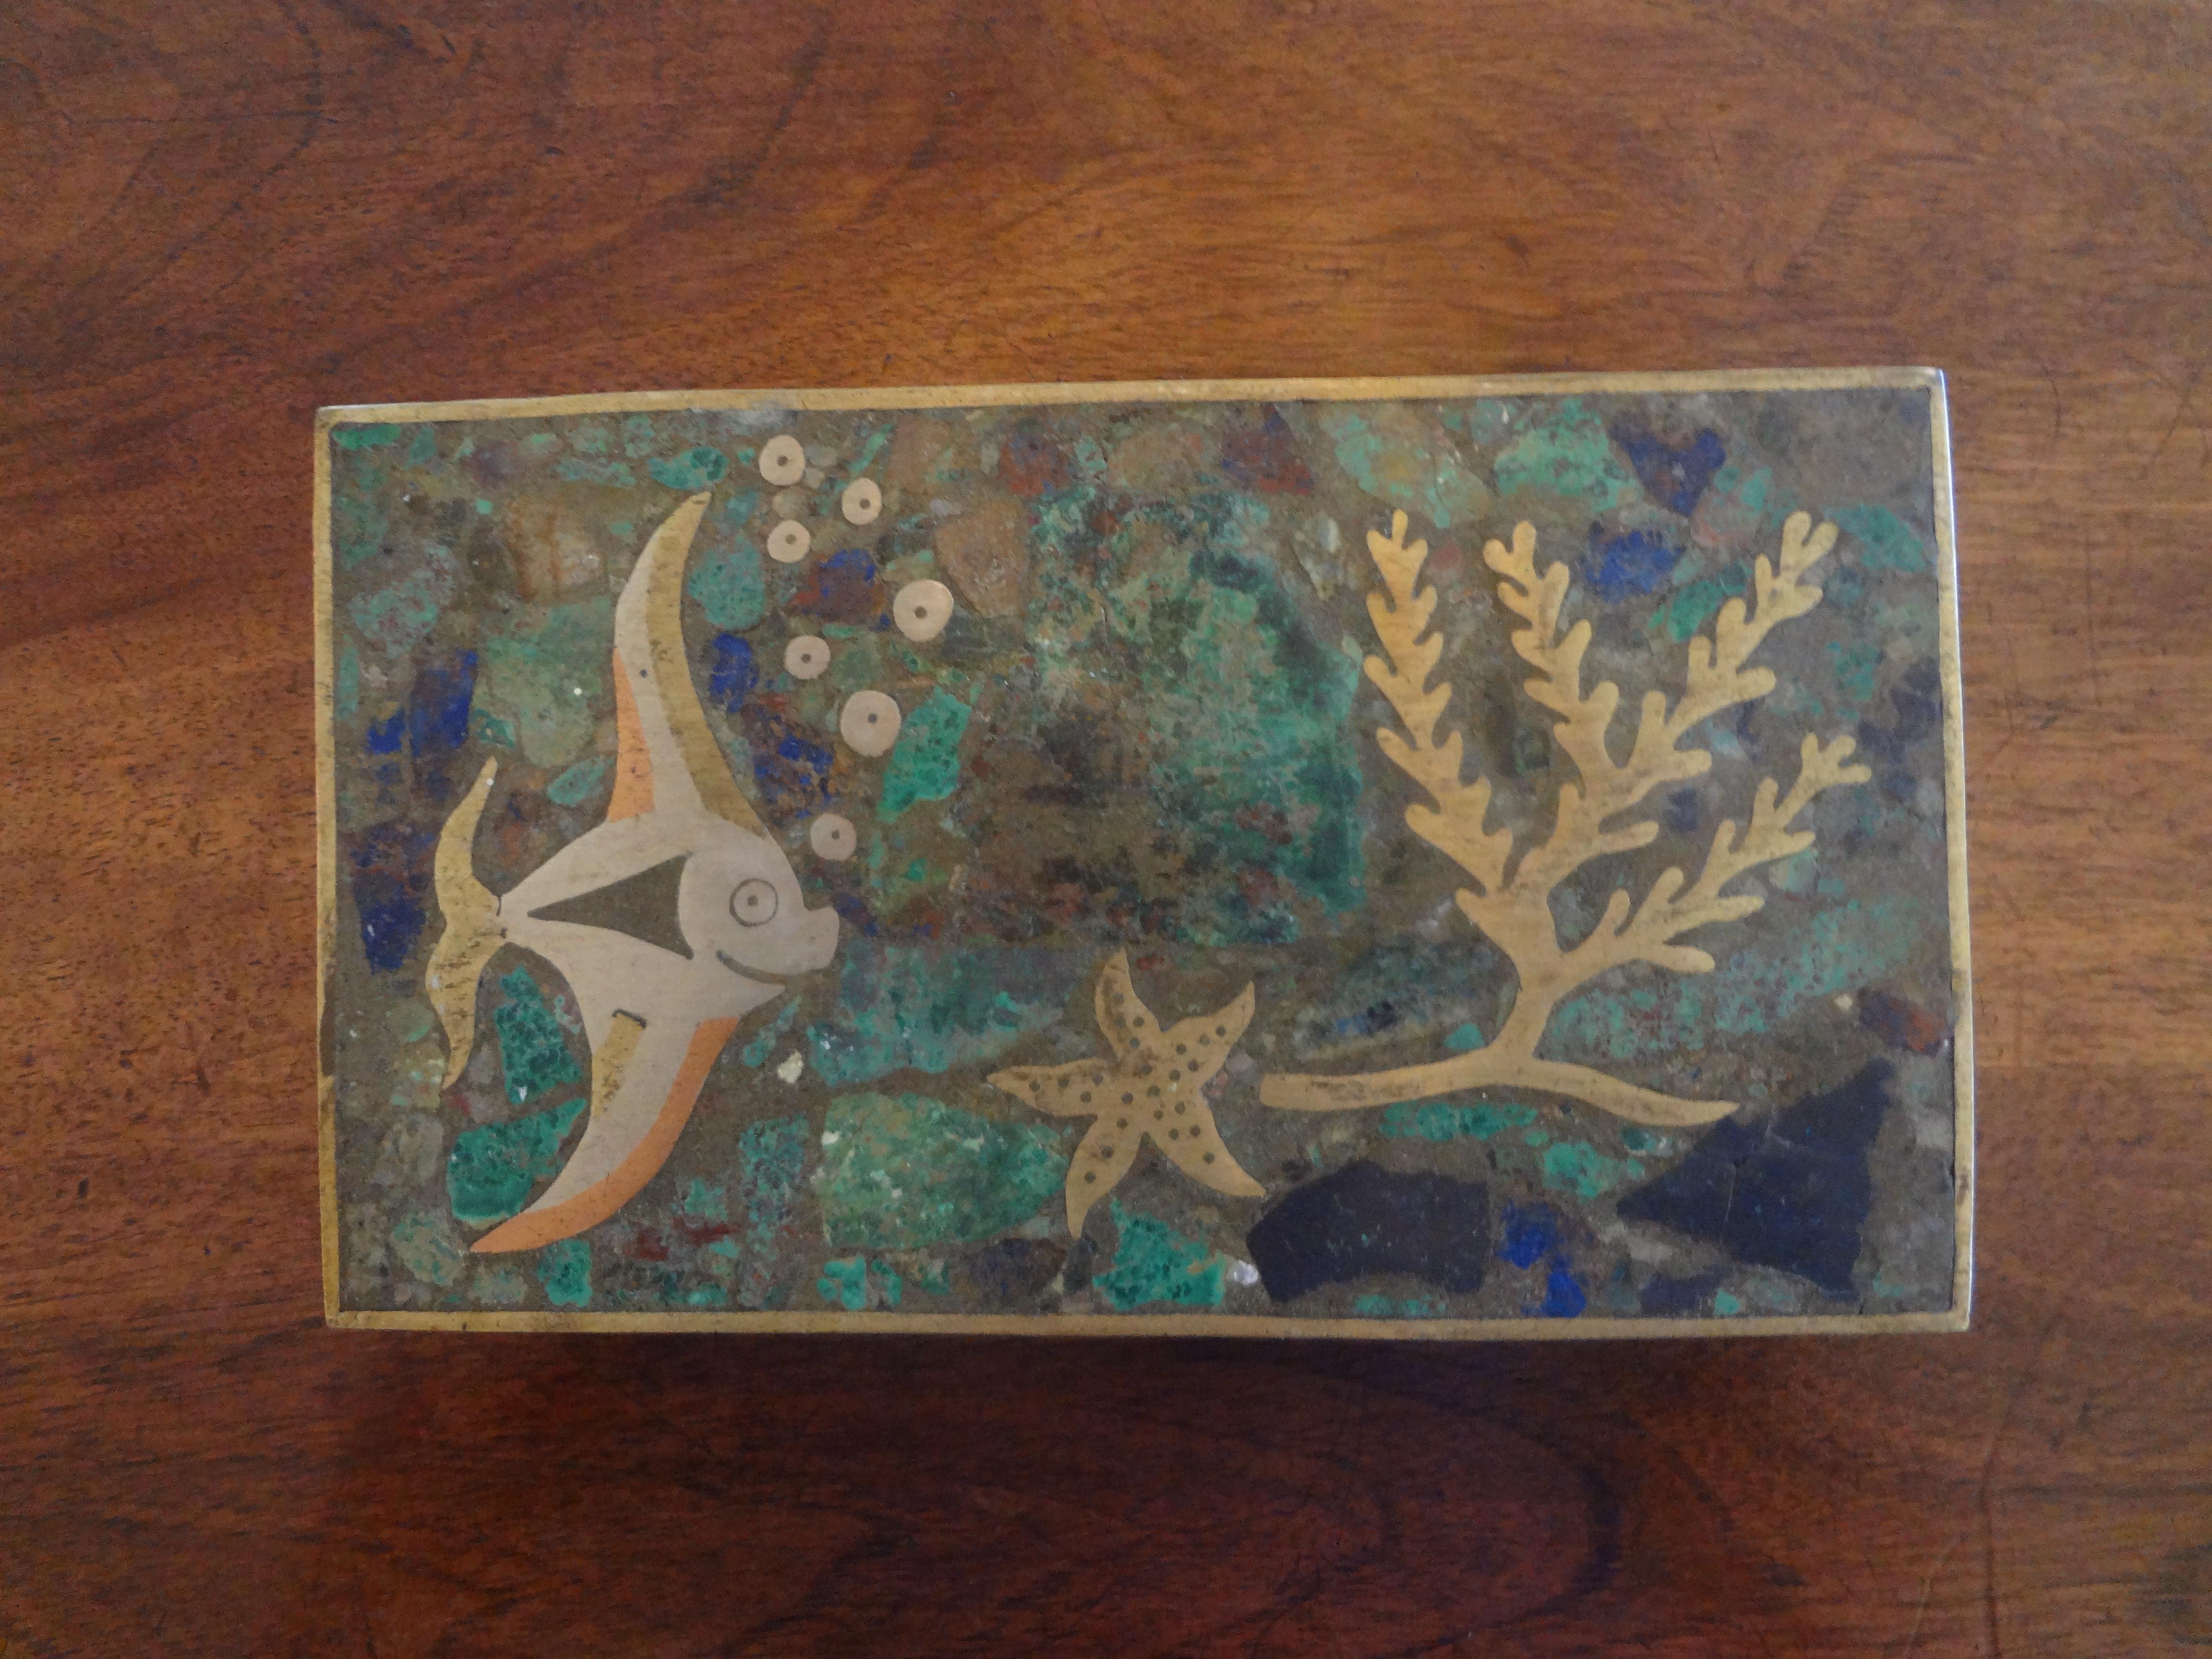 Stunning Mexican midcentury hinged brass box with wood interior featuring sealife. The lid of this decorative brass box is of mixed metals and semi precious stones with an angel fish, a star fish and coral.
Stamped Mexico on the bottom. This